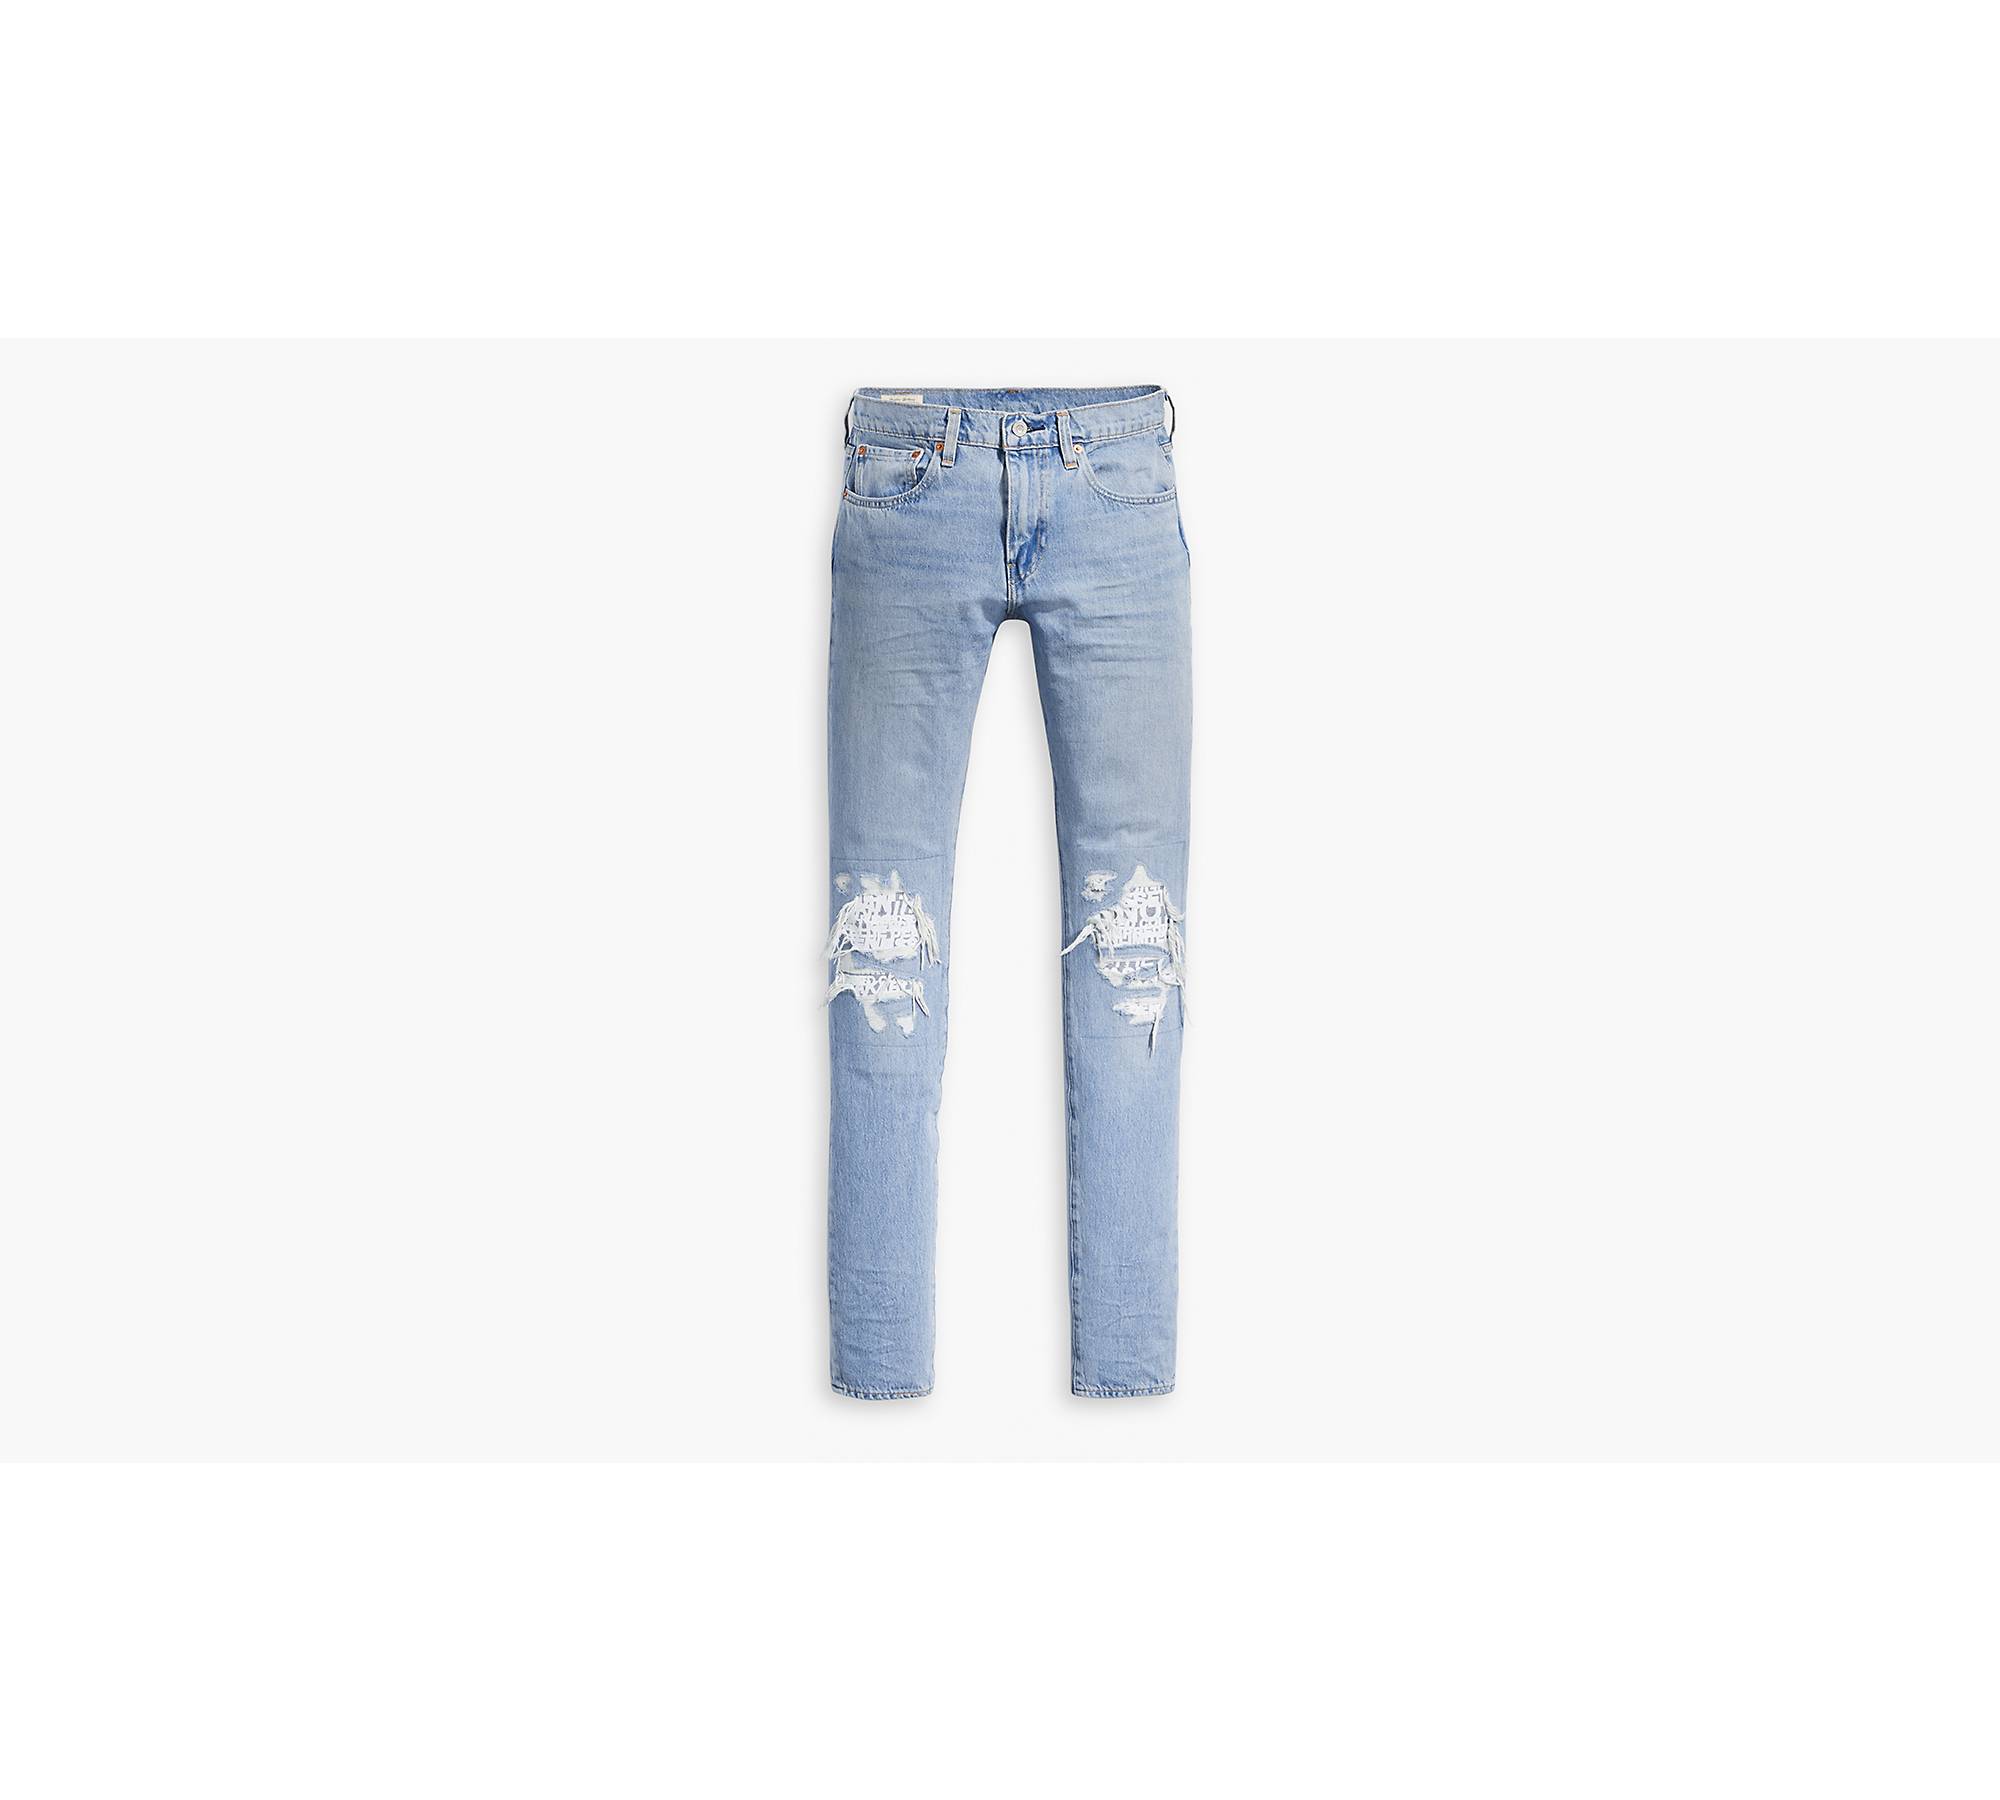 Lo-ball Stack Men's Jeans - Light Wash